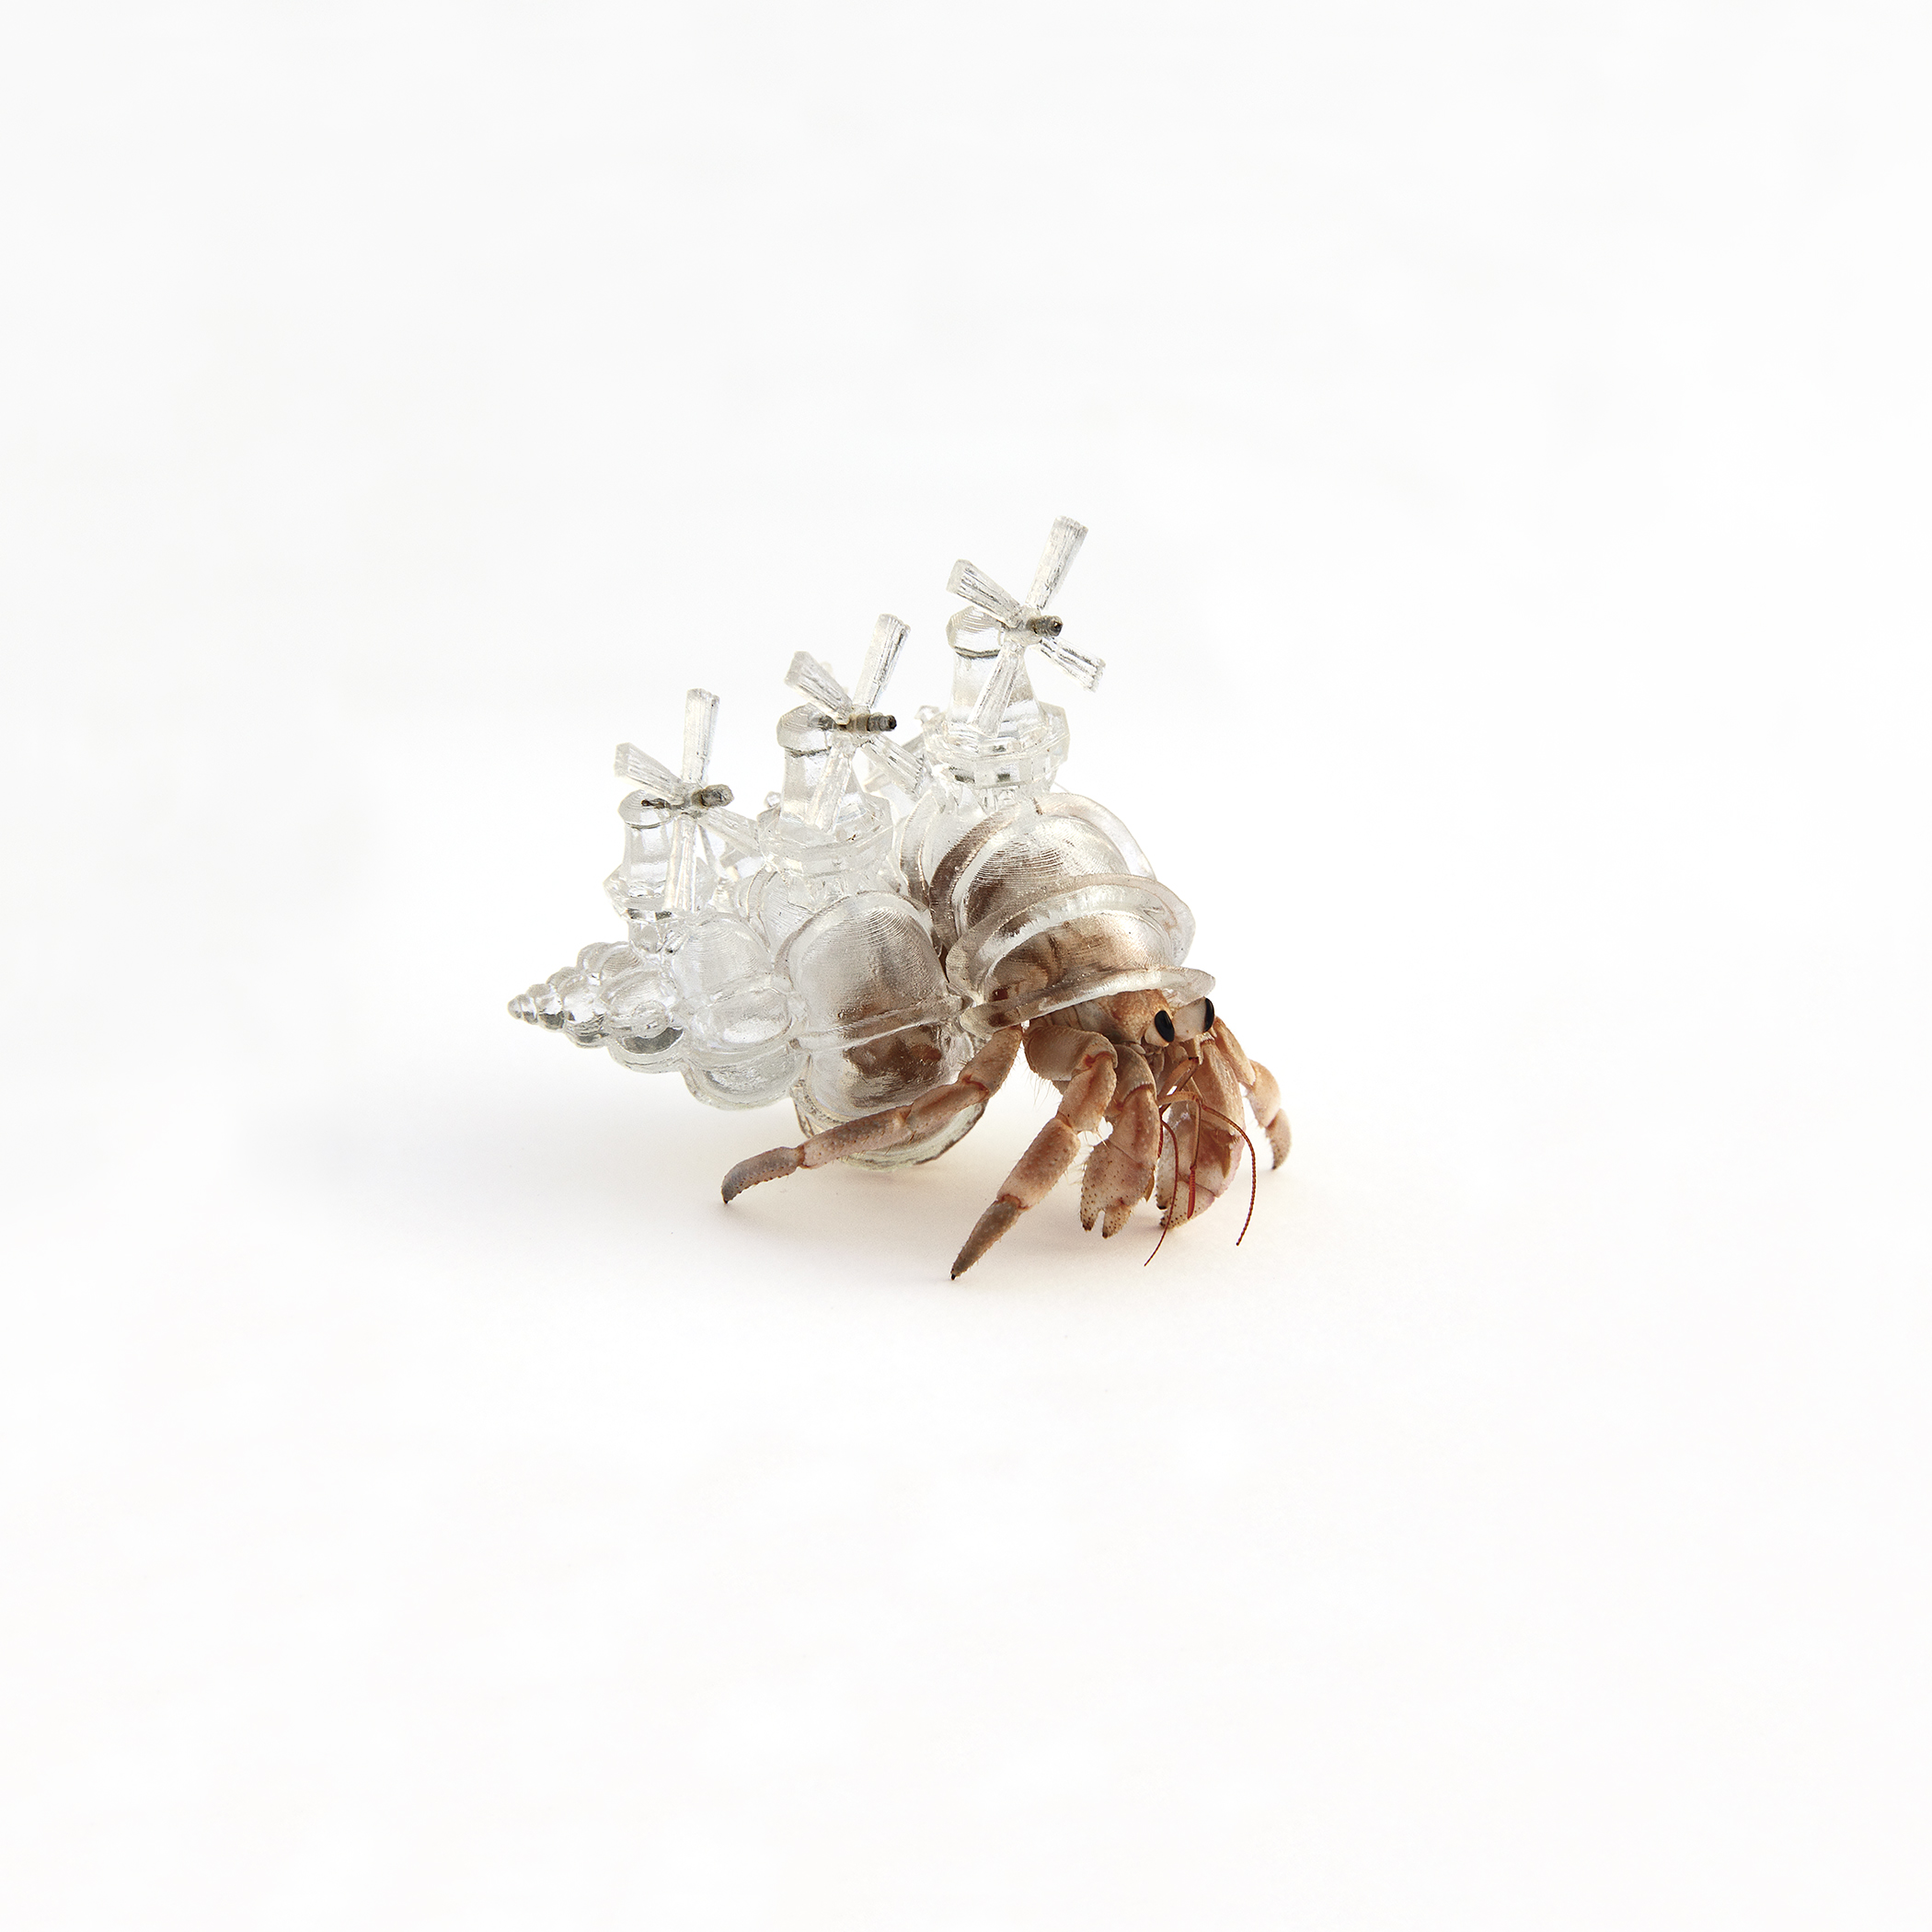 Why Not Hand Over a “Shelter” to Hermit Crabs? -Border-